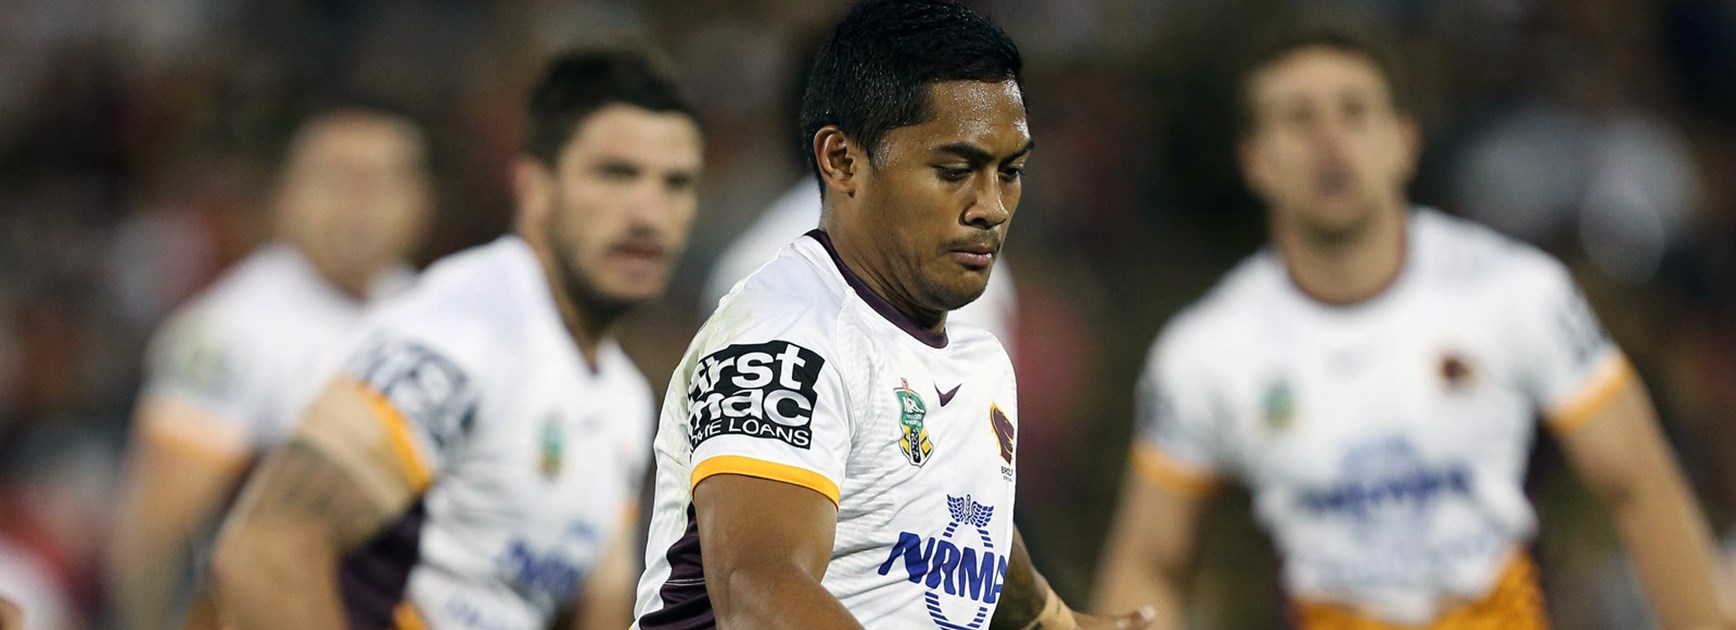 Broncos five-eighth Anthony Milford was a standout performer against the Panthers in Round 3.